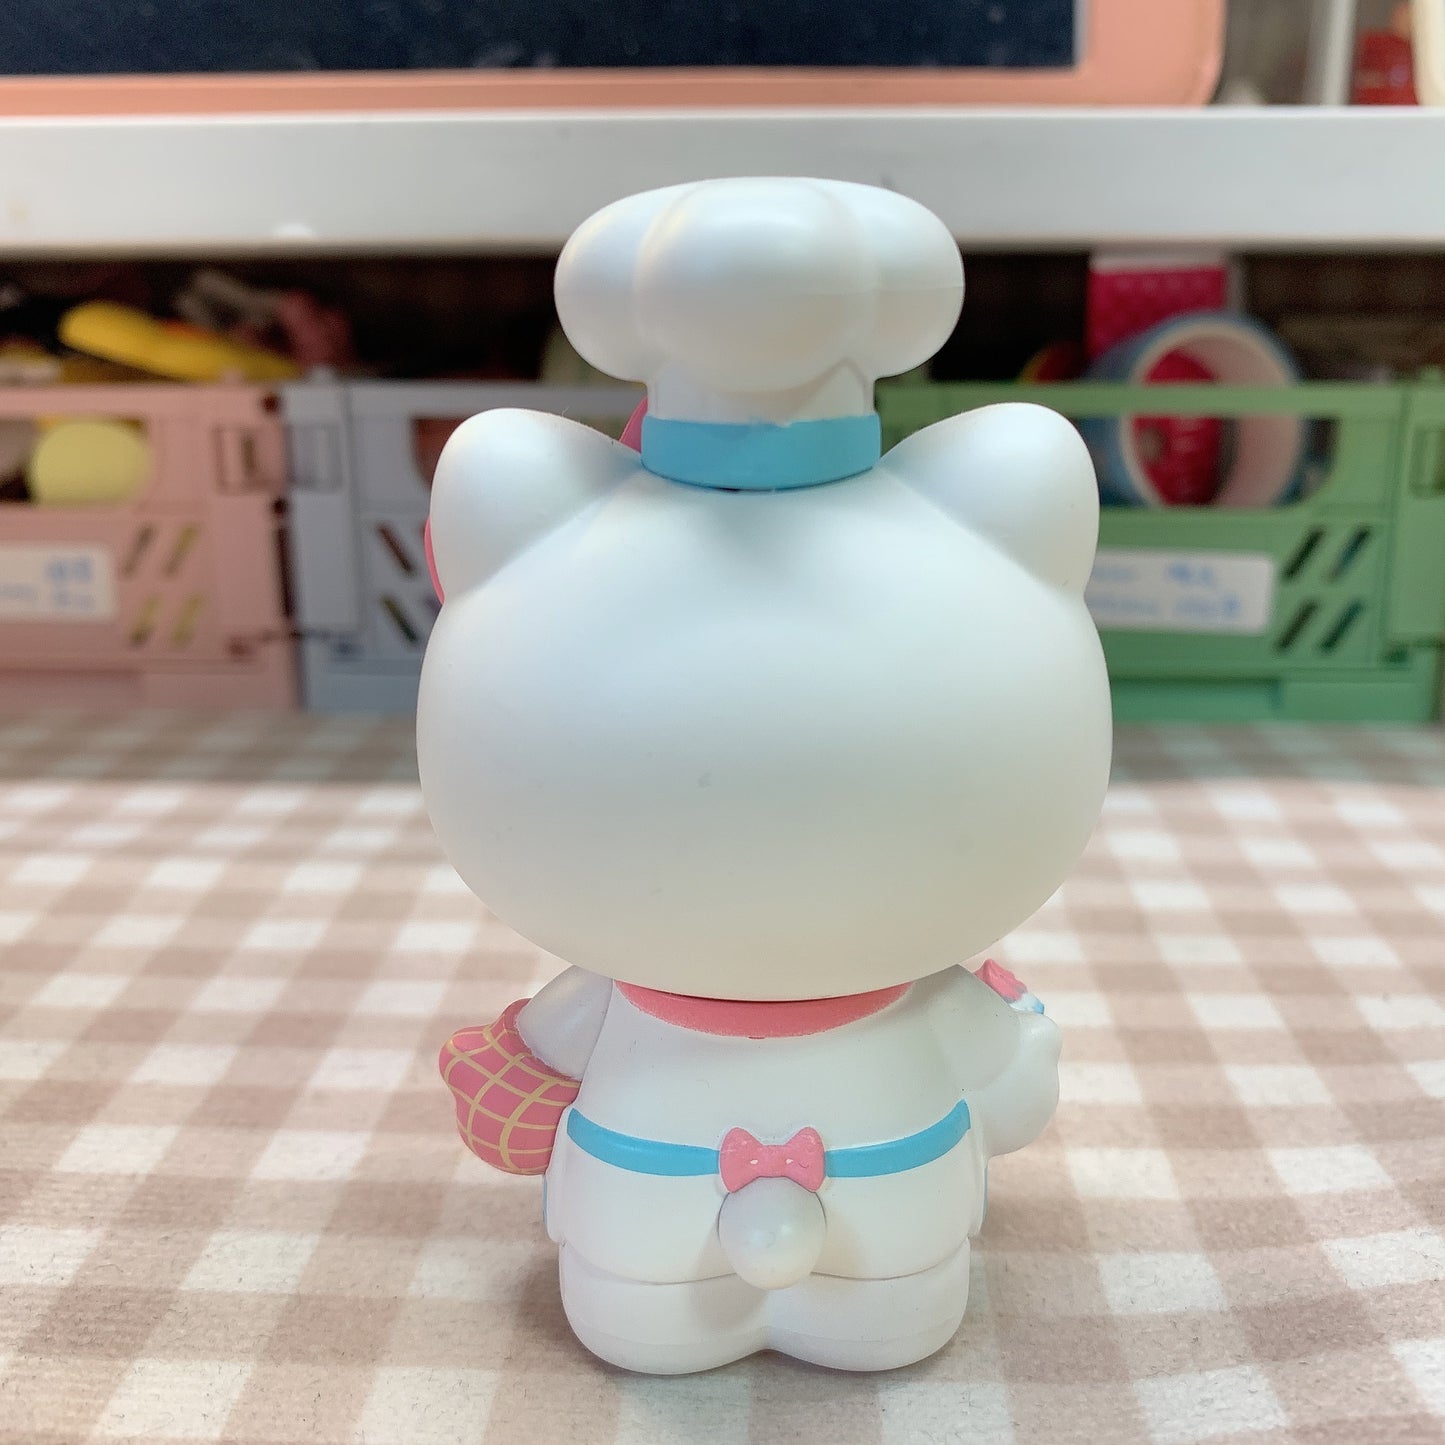 【PRELOVED and SALE 】POPMART × Sanrio Hello Kitty Career series blind box toy pastry cook